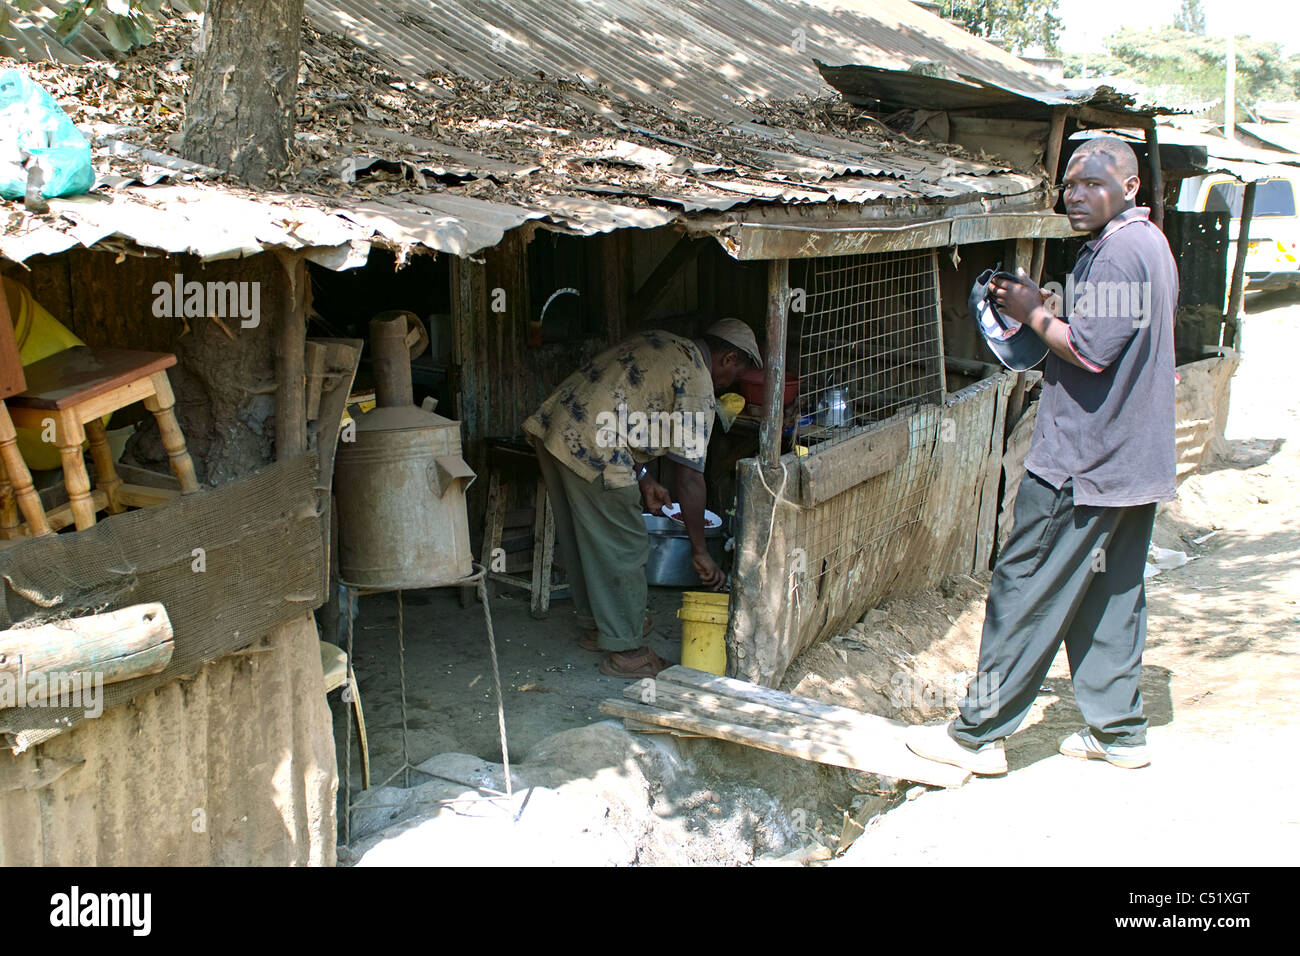 Looking into hut where food is being prepared in Nairobi slum area. Stock Photo